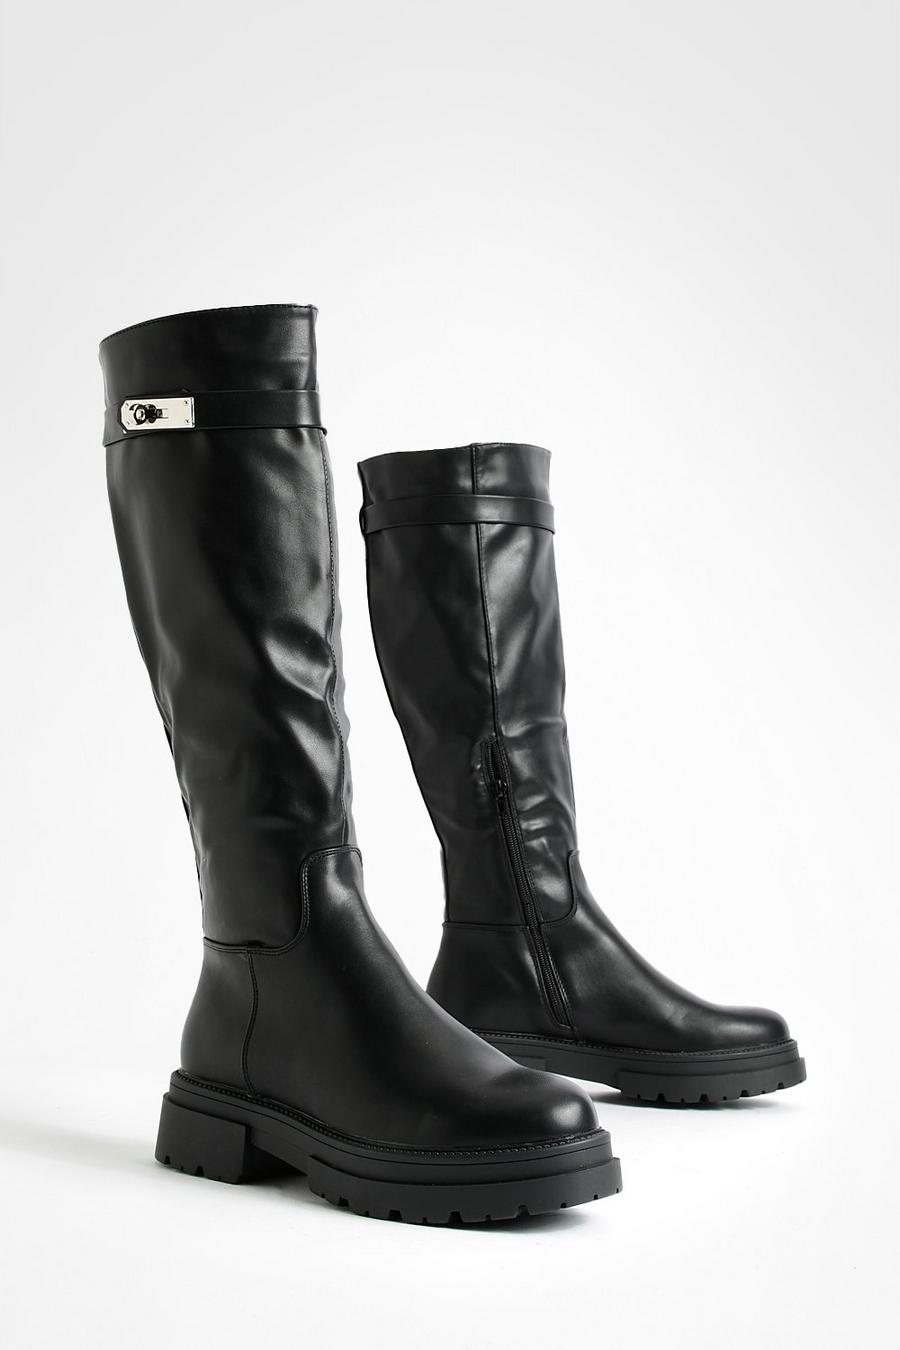 Buckle Detail Chunky Flat Knee High Biker POMPEII Boots image number 1